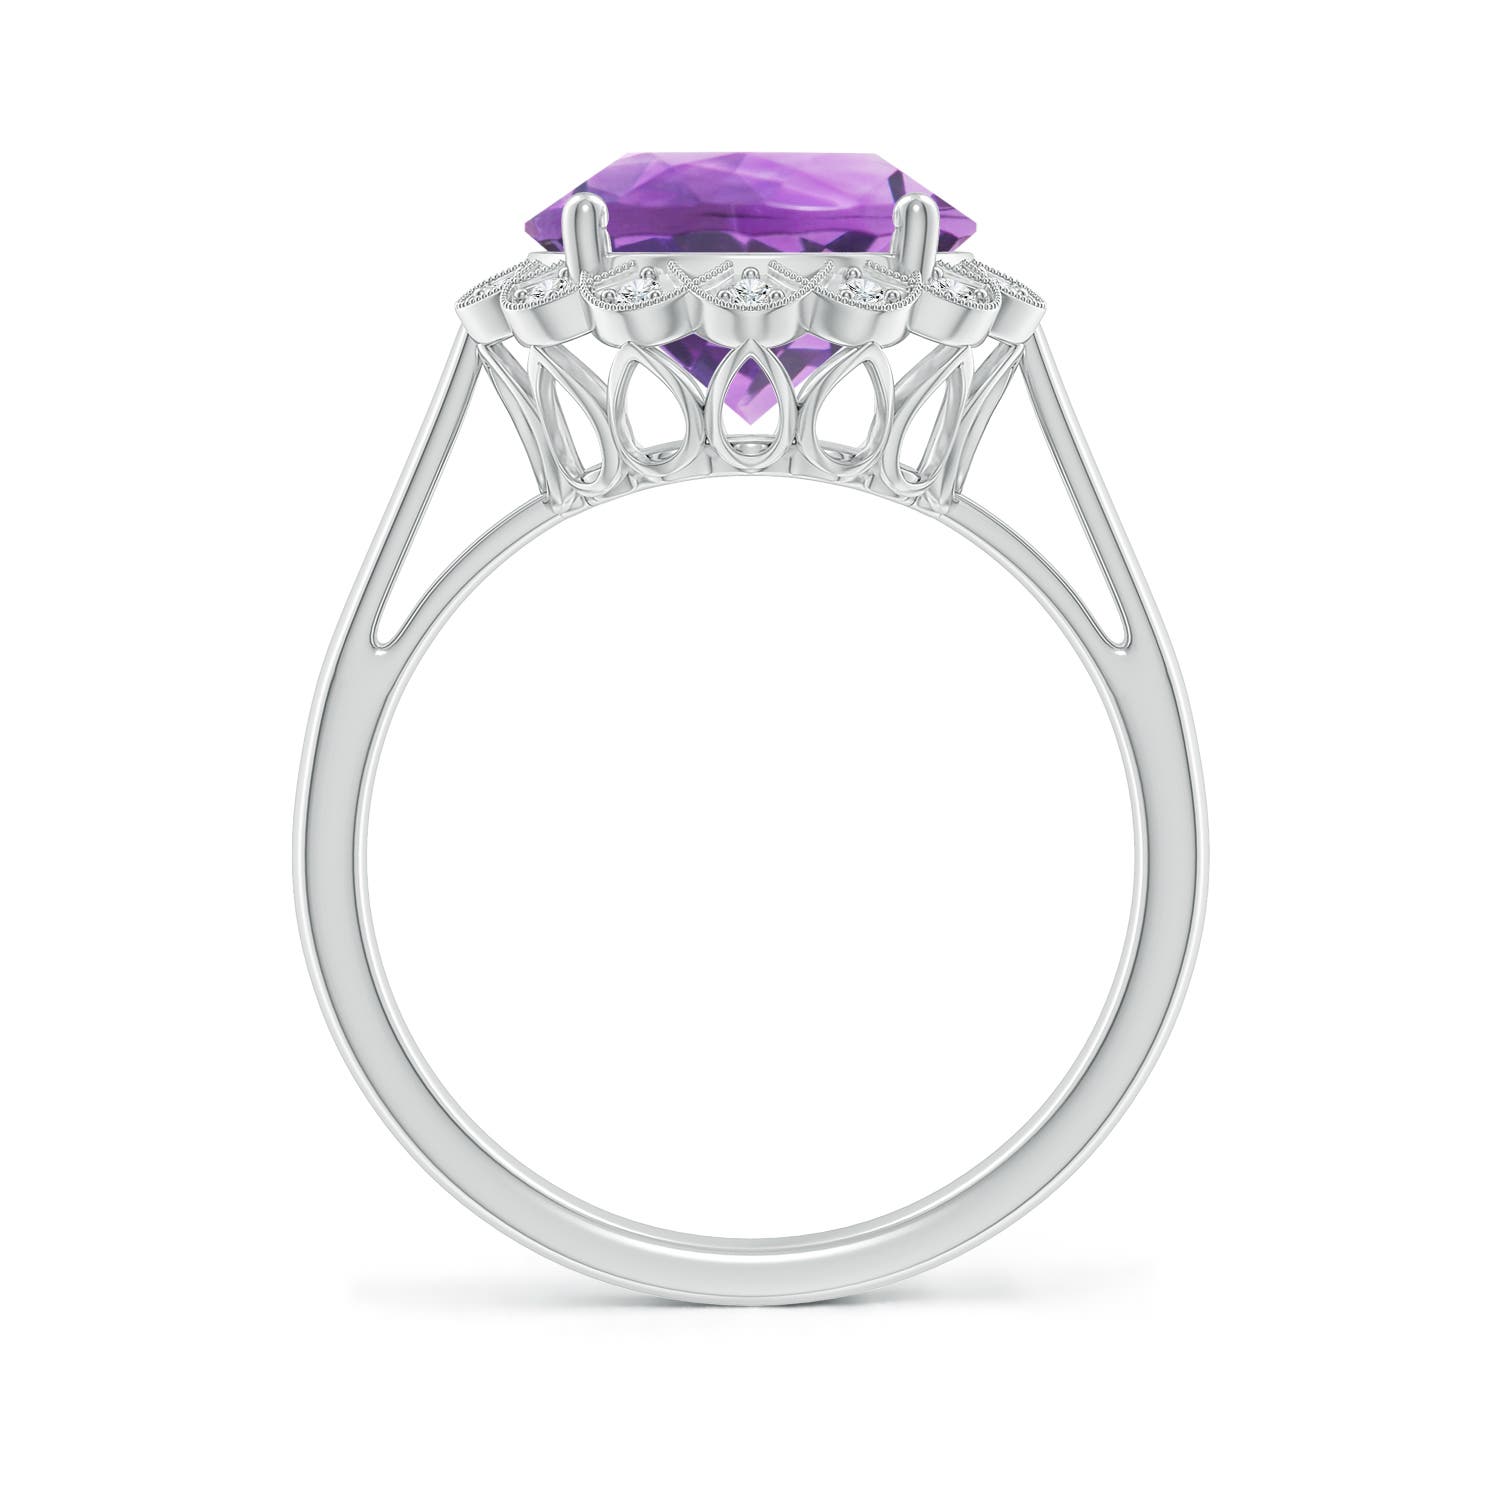 A- Amethyst / 3.28 CT / 14 KT White Gold